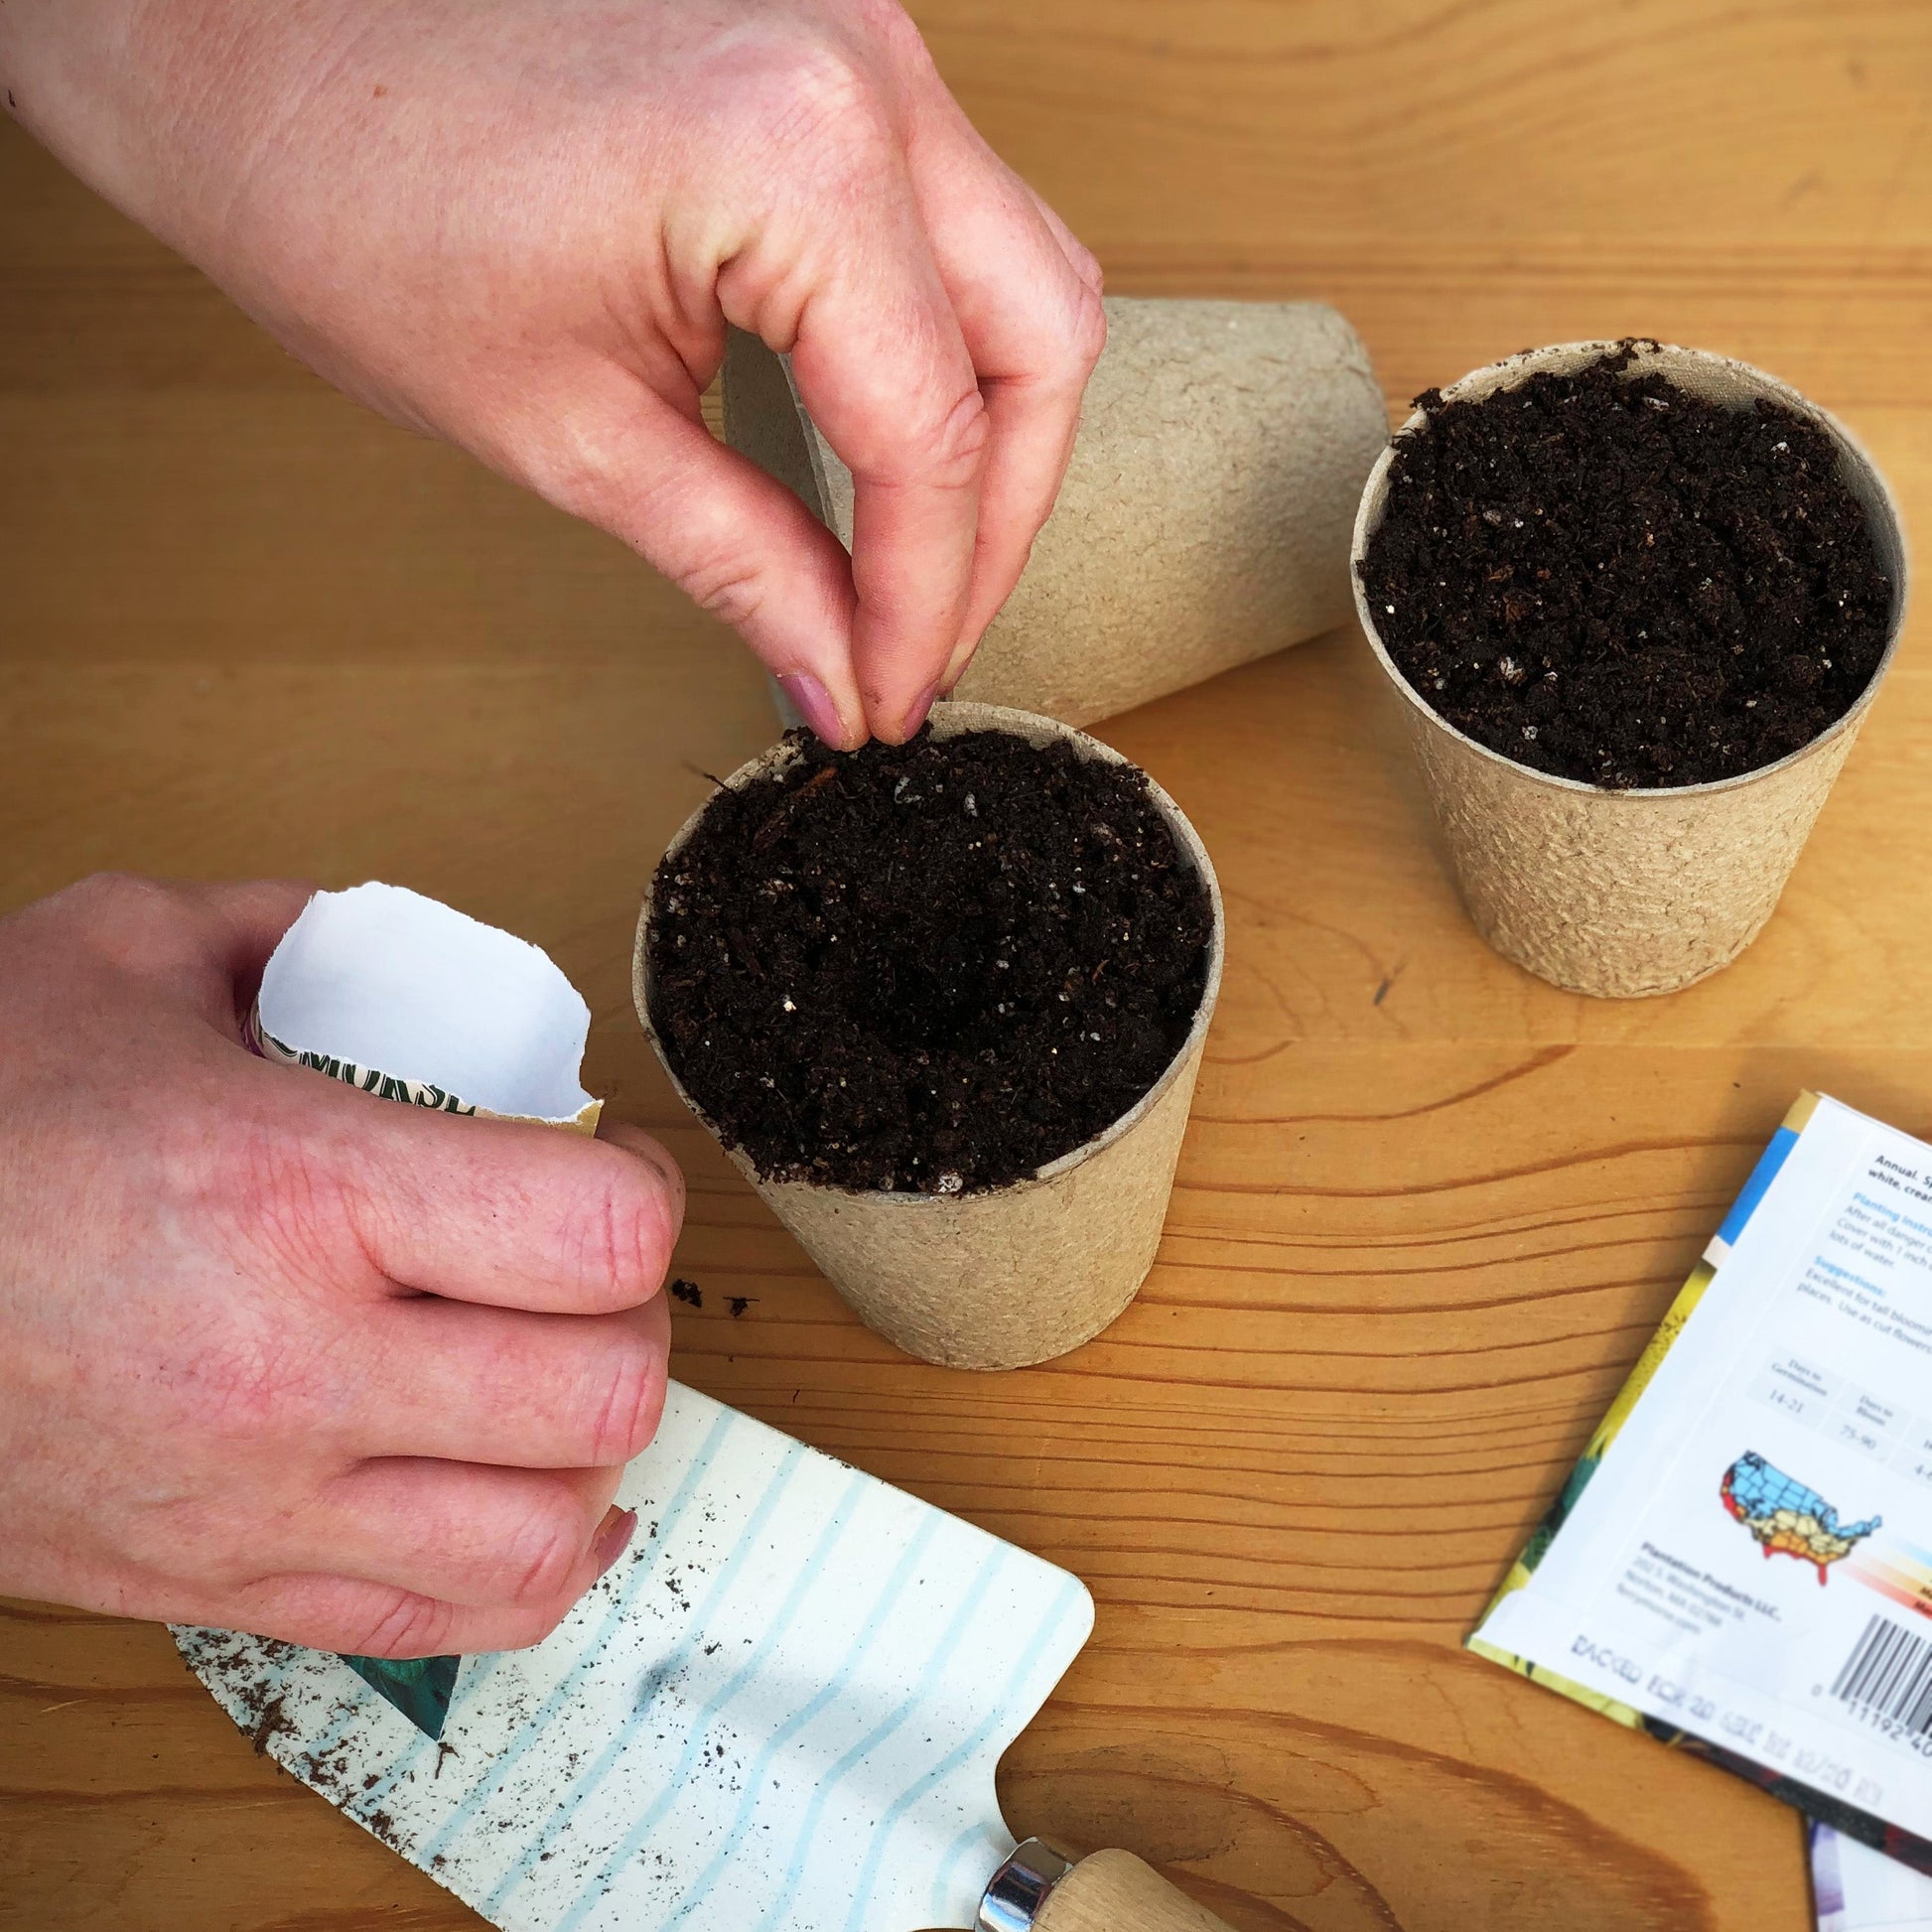 Sowing Bush Type Spacemaster Cucumber Seeds into biodegradable Jiffy peat pots filled with sowing medium to start cucumber plants off right!